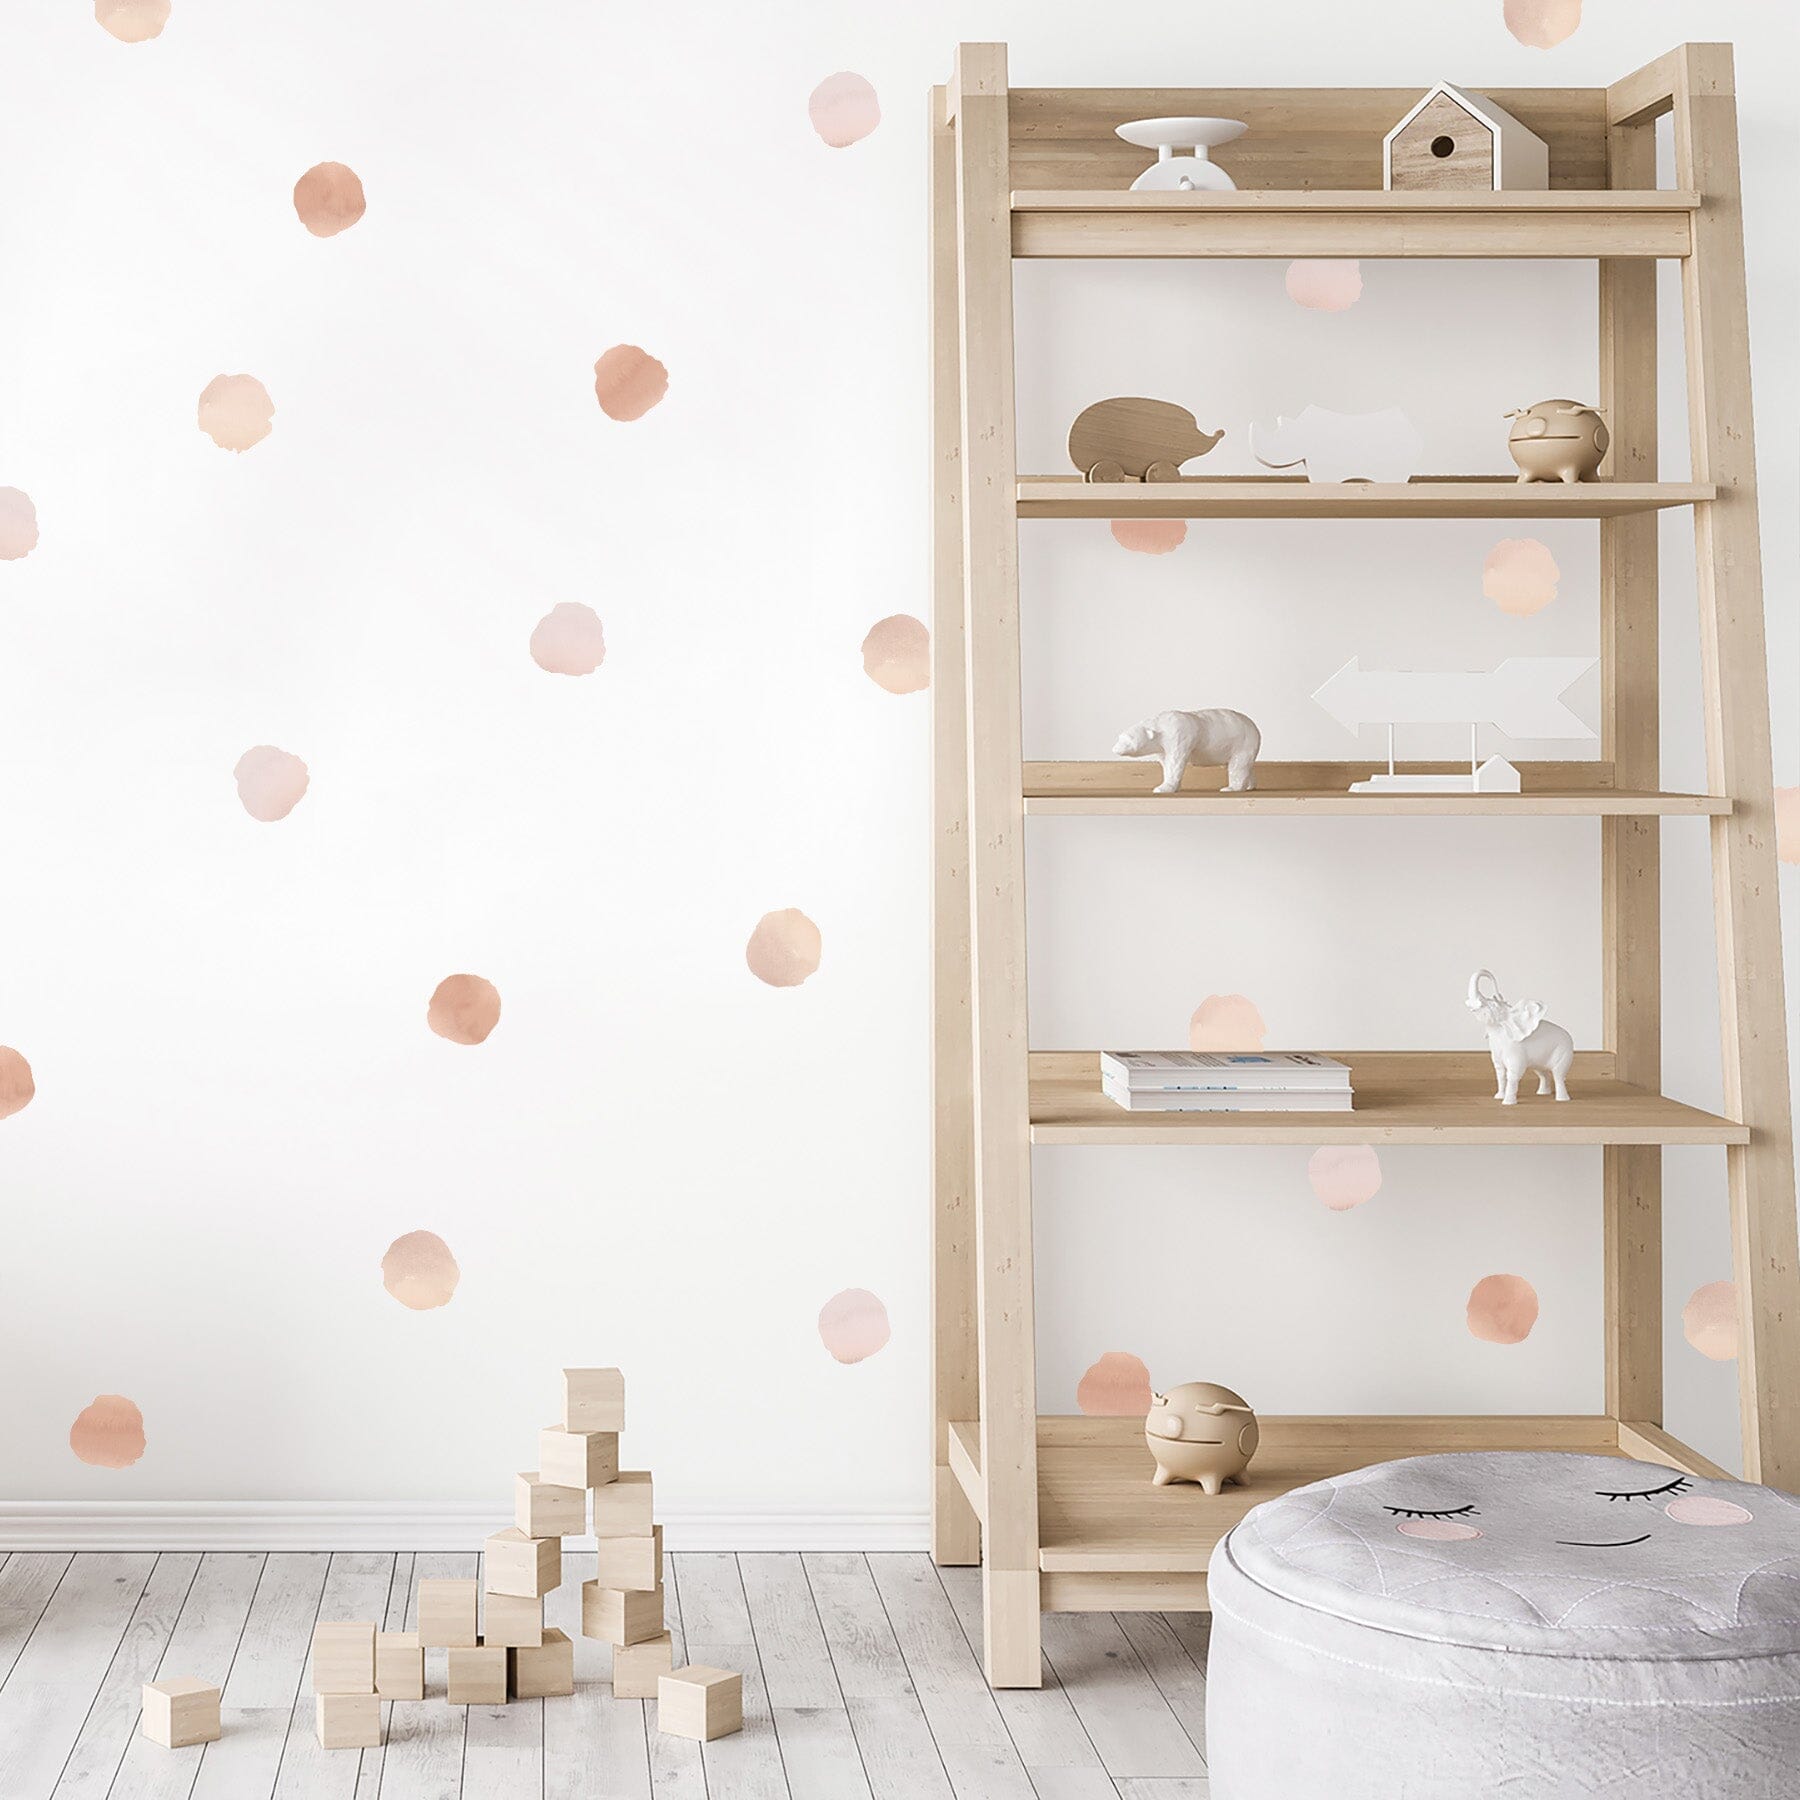 watercolor-polka-dot-wall-decals_wall-decals-for-kids